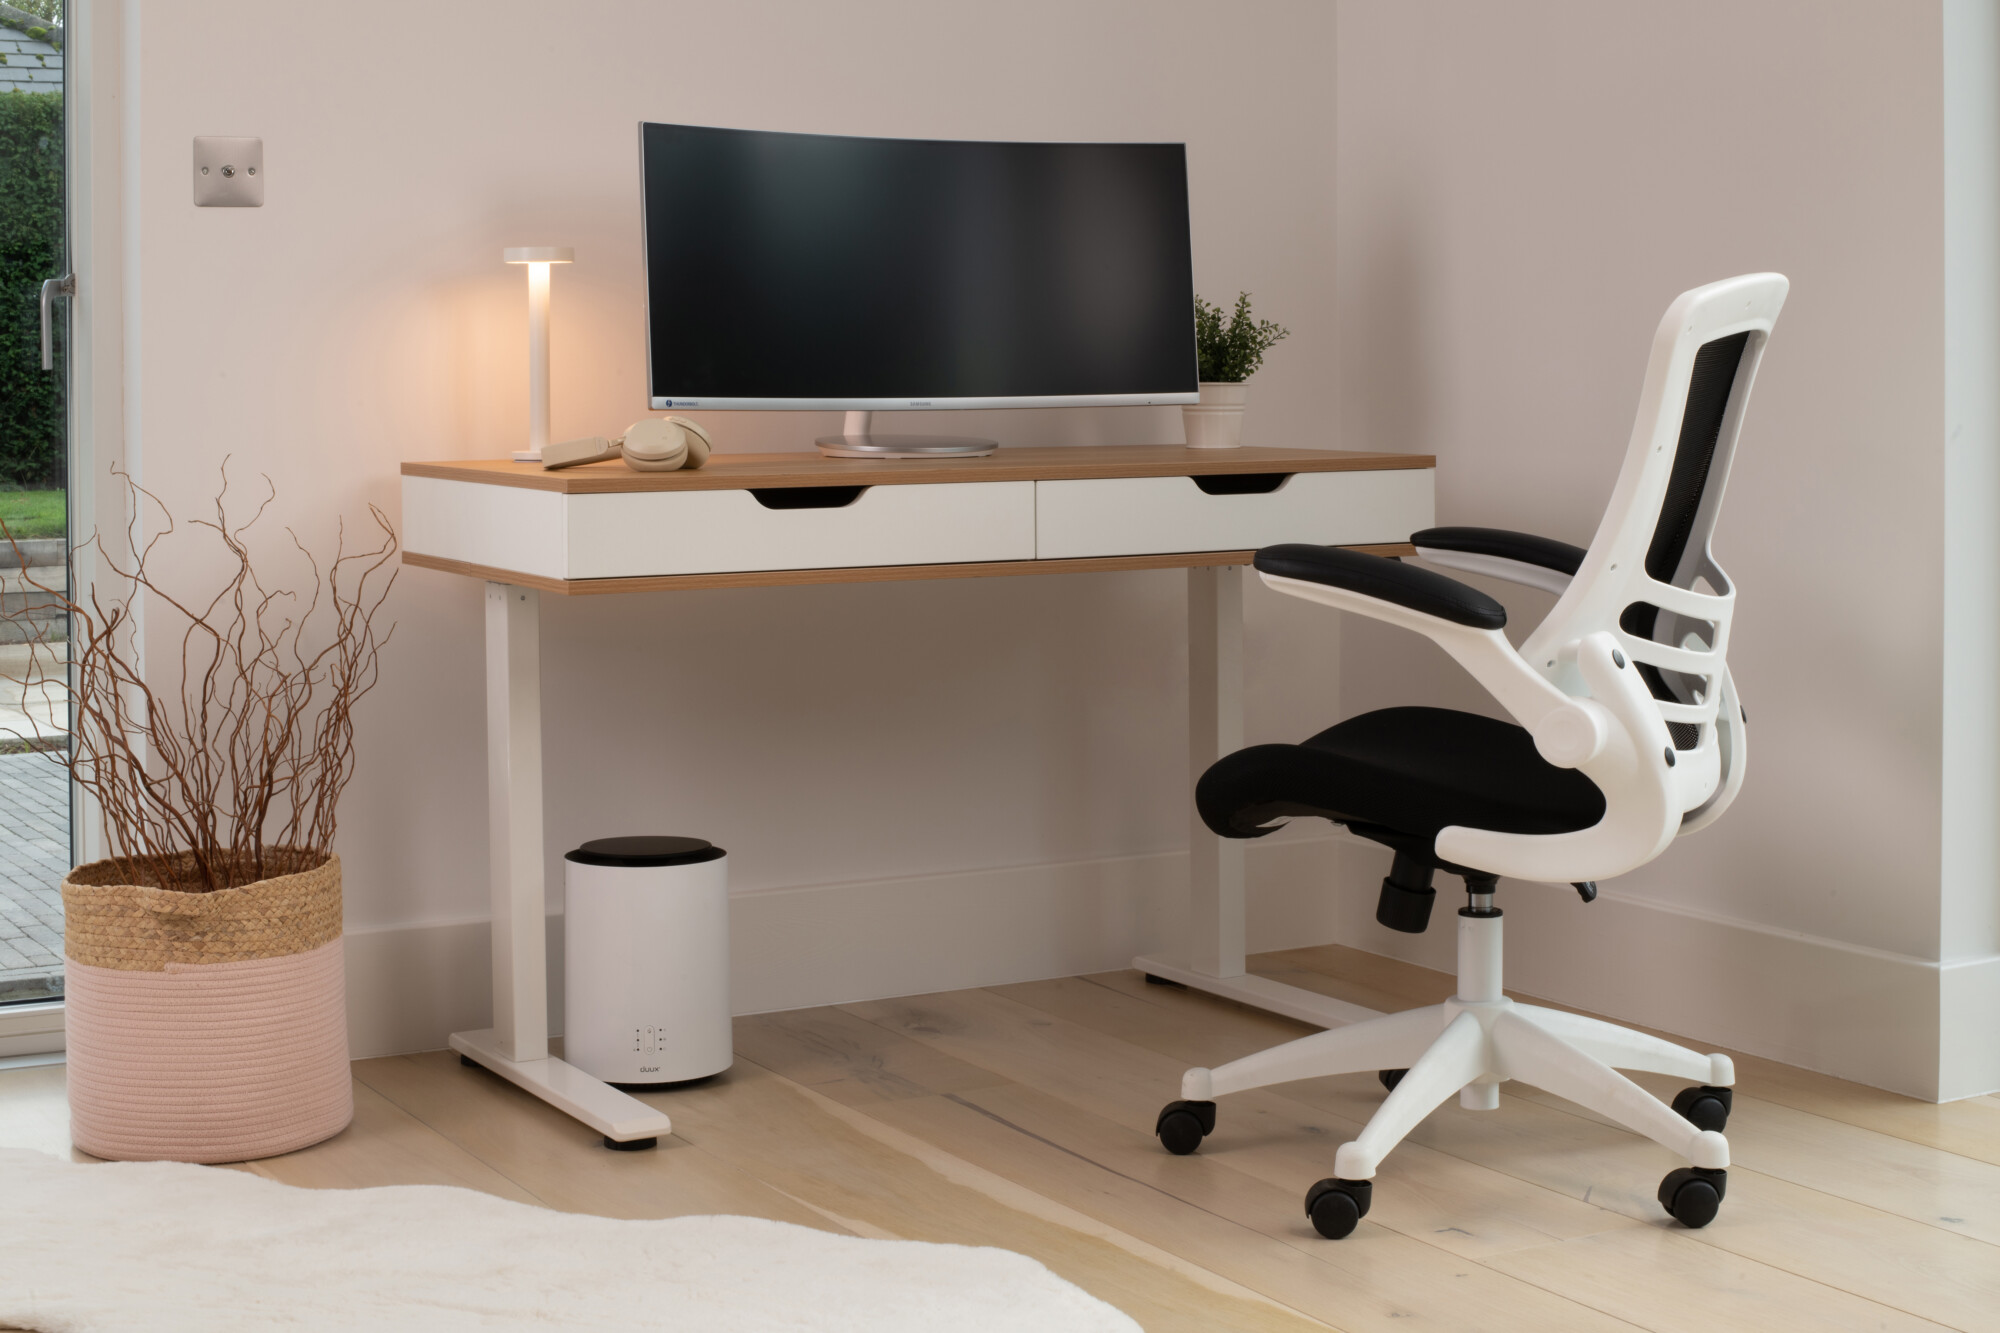 Koble Ola Height Adjustable Desk With Drawers 